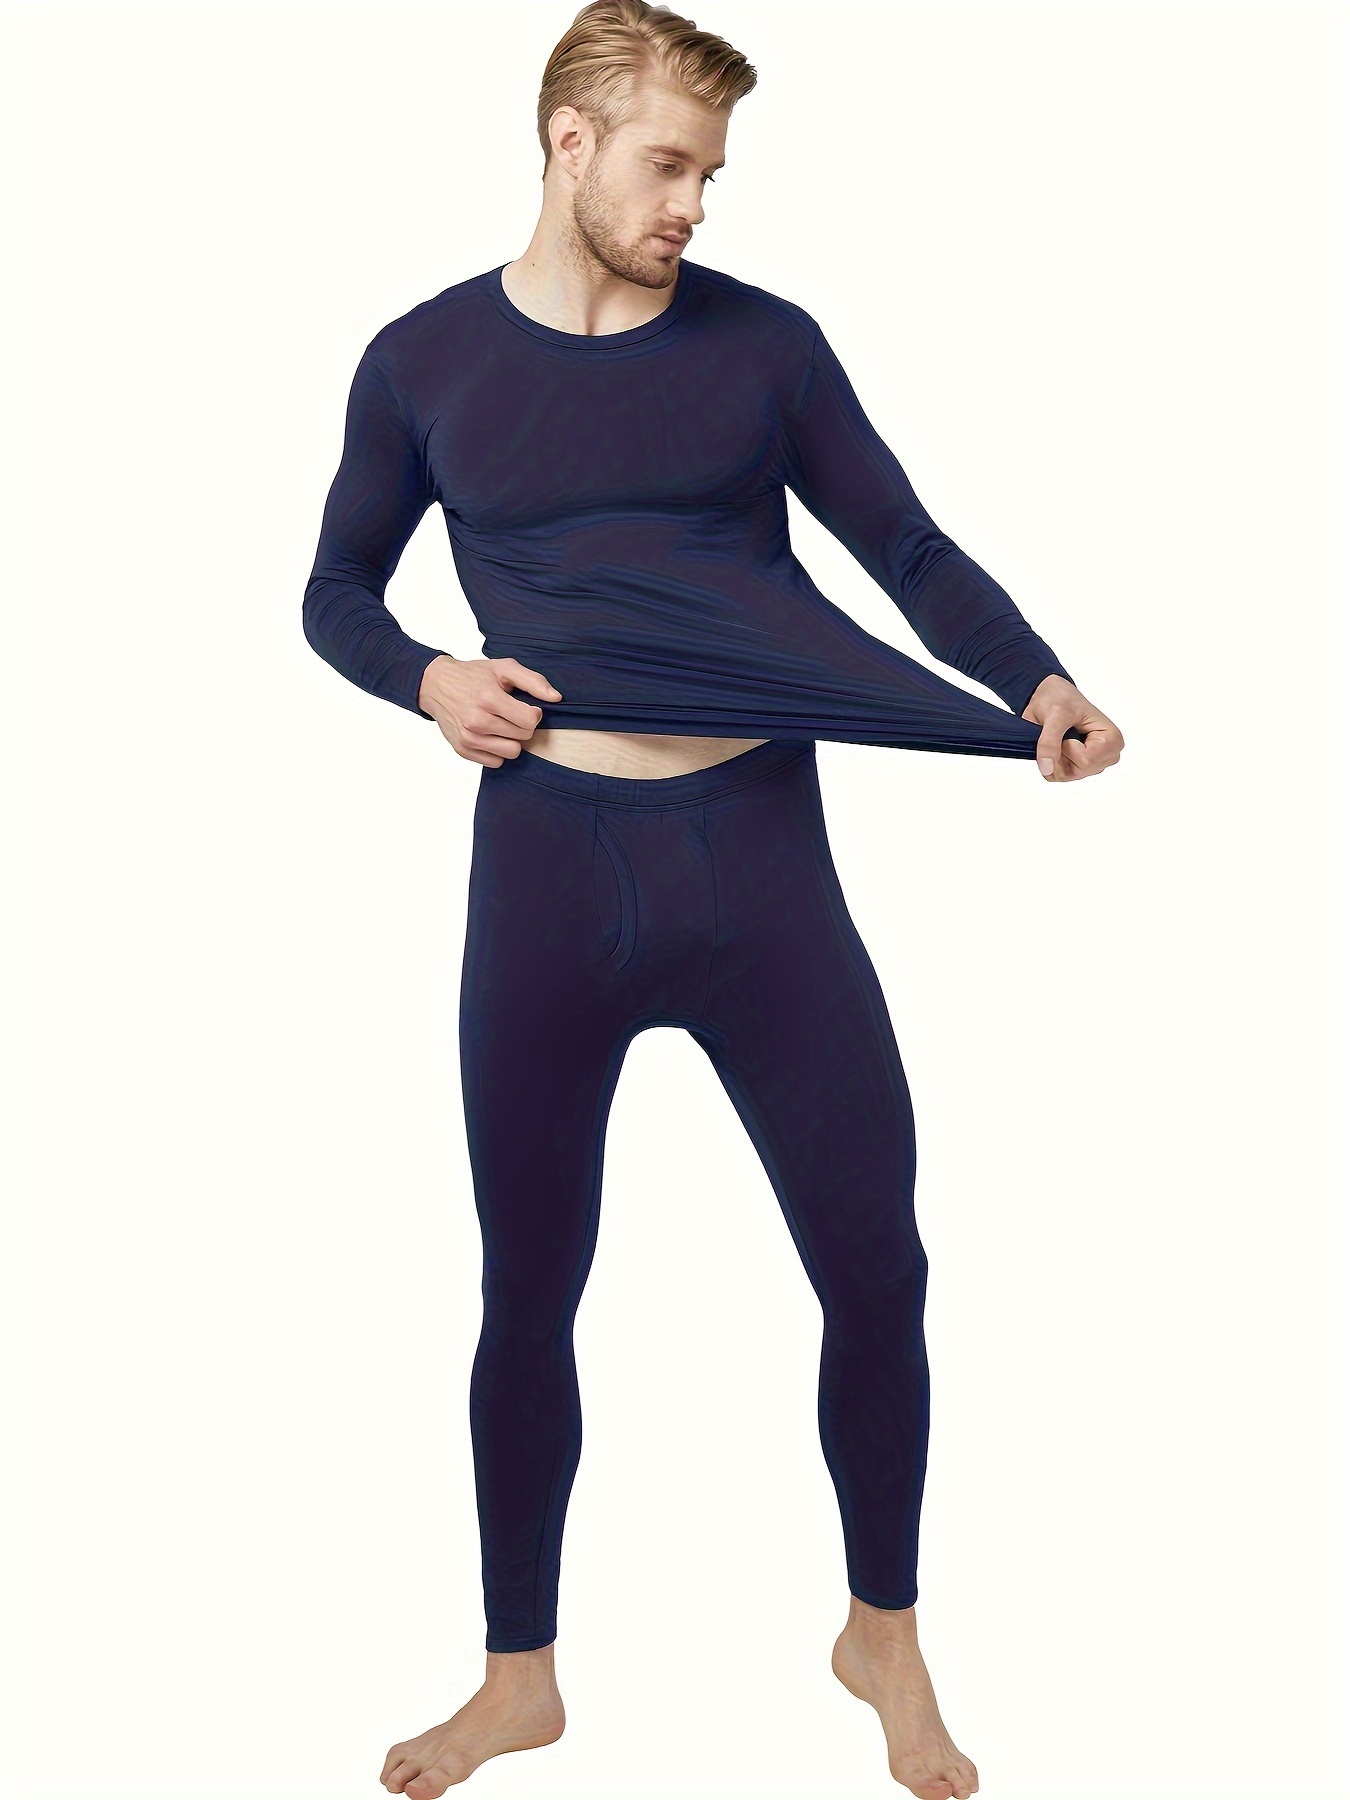 Thermajohn Long Johns Thermal Underwear for Men and Women Fleece